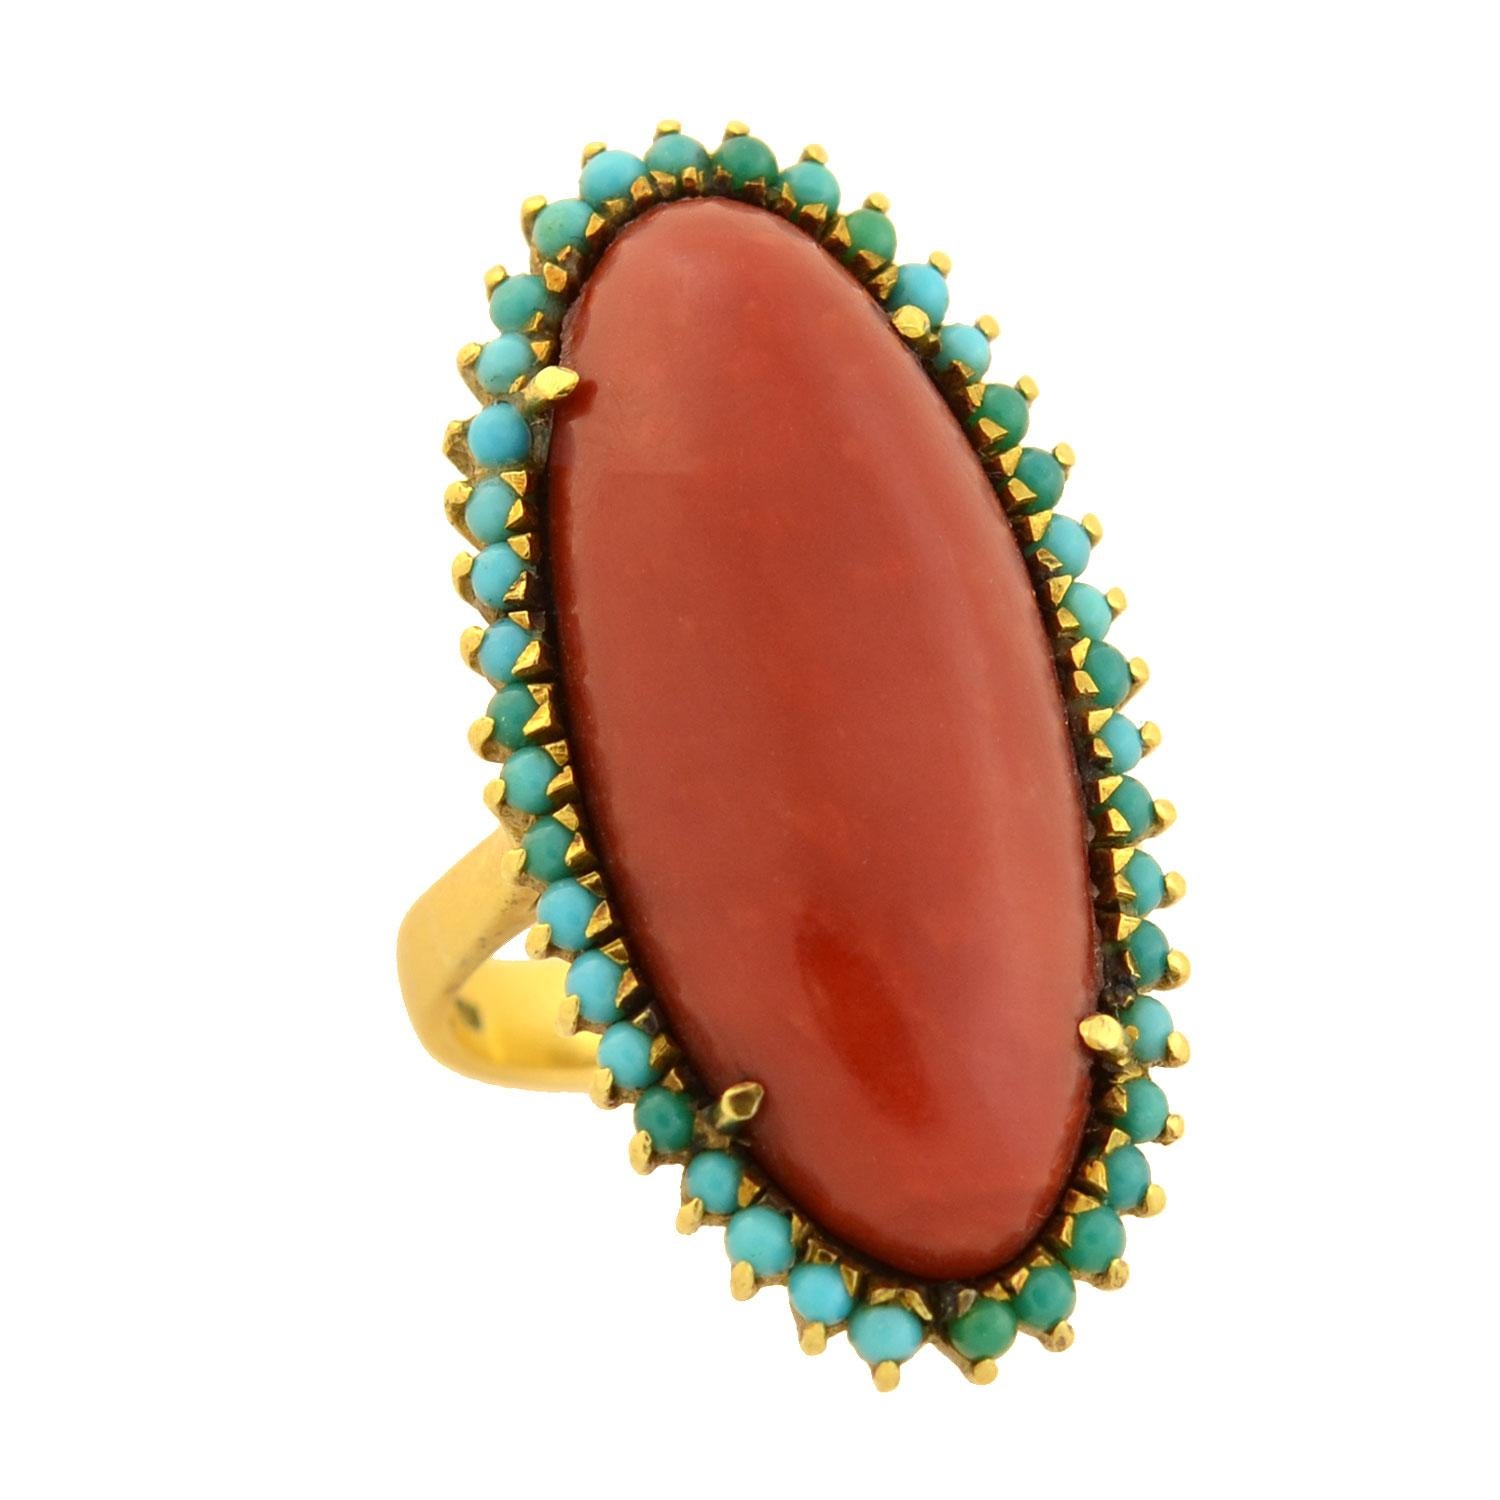 Women's Victorian Elongated Oxblood Coral Turquoise Ring